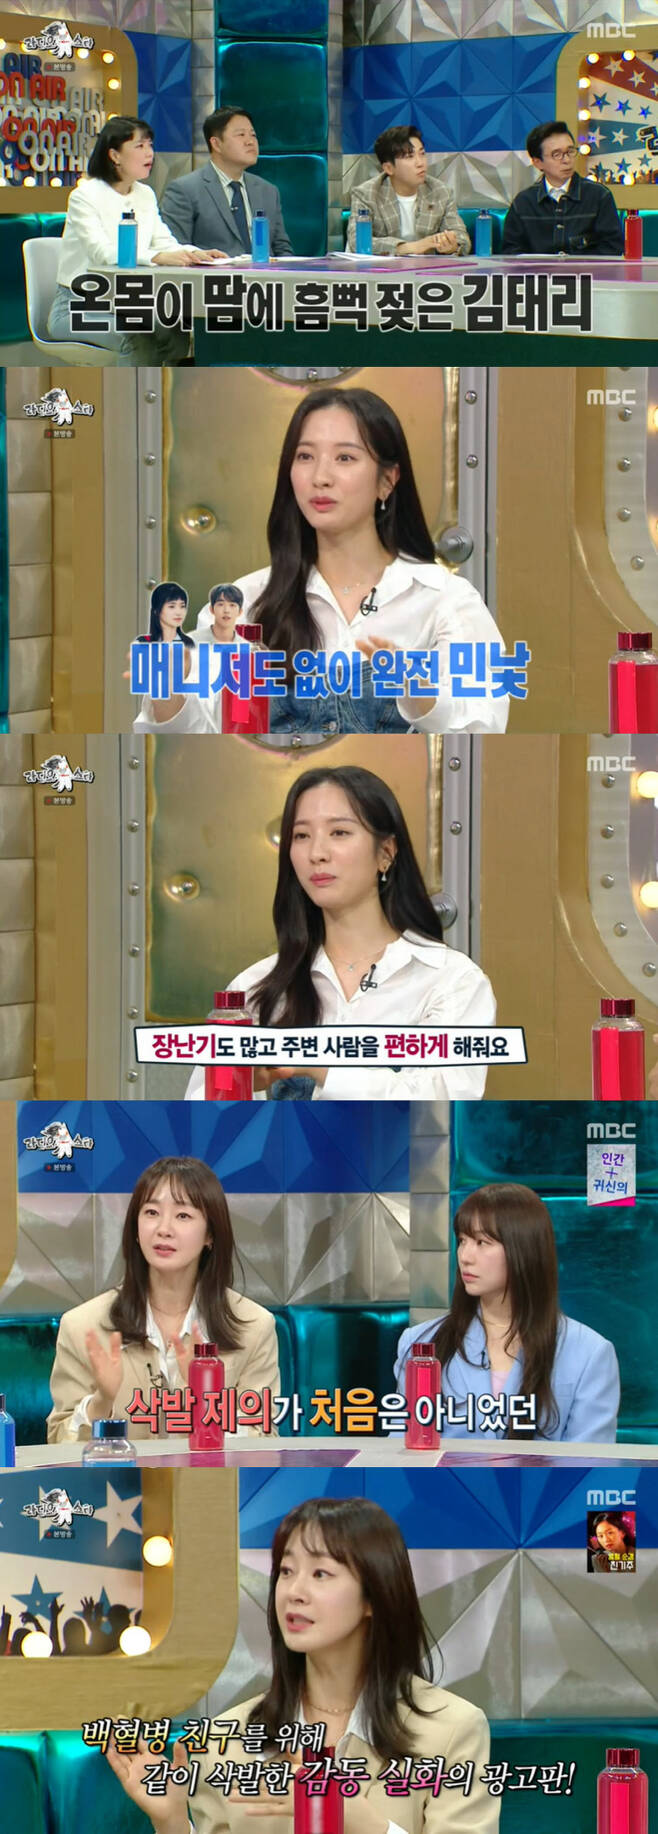 Radio Star Heo Kyoung-hwan told the episode of Kim Ji-min, who became Kim Jun-hos lover, from business sales.In MBC entertainment program Radio Star broadcasted on the 27th, Myung Se-bin, Yoon Eun-hye, Bona, Heo Kyoung-hwan appeared as guests.Heo Kyoung-hwan, who also succeeded as CEO of chicken breasts, said of the reason for appearing on Radio Star, Did you come when the writer came when he was 15 billion won (sales) during the preliminary interview?I wanted to clean up the assets in this case, he said. I do not include VAT and I am making sales of about 60 billion won. Heo Kyoung-hwan said, Every time Radio Star comes, sales rise by 200%. Recently, it merged with the largest milk kit company in Korea.Now that the scale is so large, I will leave it to a professional manager and I will concentrate on broadcasting. Yoon Eun-hee has applied hair growth to his eyebrows for the styling of the drama Coffee Prince 1st Store, which solidifies the First Love image.Yoon Eun-hye said, I was almost the first to try a male female station, so I watched the mens steps and posture for a long time.I lived in mens clothes for a month ago, and I wore sponsored clothes to look like the clothes I wore. In the meantime, the space girl Bona completed the 2022 First Love image with tvN Twenty 5 Twinty One.I was practicing Miri four months ago and I was trained to play with Kim Tae-ri. Bona said, I was trained in Miri.Both of them have a lot of fighting, so if one of them loses, I tried to get back next week and practiced. Bona also mentioned Kim Tae-ris extraordinary passion: Bona said: I was surprised to see him really hard, I invited him home once and the distance is quite a bit.It is more than an hours walk, but I ran the street with a sandbag. It was shocking in a good sense. Nam Joo-hyuks first impression, which was in close contact with him, was different from his thoughts. I did a lot of expectations, Bona said.I had a picture that I imagined, but on the day of reading the script, Ju-hyuk came on a kickboard and Tari came on a bicycle.There are many Settais, and they make people around us comfortable. They also make a lot of gags. (Nam Joo-hyuk) likes gags, Nam said.Myung Se-bin had shaved for a snack ad; Myung Se-bin said: Ive had an offer before, but it was an ad for painkillers.Conti was related to the monk, but he refused because of religion. But the advertisement was an advertisement for a friend with leukemia.Heo Kyoung-hwan said, I felt strange when I heard the news of Oh Namis devotion, who was a virtual couple. Oh Nami did not reveal his boyfriend without any hesitation.I saw the broadcast and the static electricity spread to my body and my strength was loose. When I saw my boyfriend, Oh Nami wanted to see the height on his face.I was blessed because I wanted to meet a really good man now. Kim Ji-min also recently revealed her romance with Kim Jun-ho.Heo Kyoung-hwan said, Kim Ji-min and I were Settai and said, If we can not get married until we are 50 years old, we will do it alone. One day, I was looking at my cell phone at home.I dropped my cell phone at that time. I am going to hang up the Internet now. Heo Kyoung-hwan said, I met Jun-ho recently and he said that he was a Ji-min, so he corrected him as Brother.I do not smell anymore. Heo Kyoung-hwan said, I talked about fifty as a joke, but I can not wait eight years.I hope you have a good result, said Kim Ji-min.Yoon Eun-hye is an indispensable love line with Kim Jong Kook.In Running Man, there is Yoon Eun-hye collection even though Yoon Eun-hye did not appear.Yoon Eun-hye said: My brother Park Jae-seok sometimes talks about me on Running Man: What do you do when you play?I also talked about me, he said. So I called Park Jae-seok, my first words were Im sorry. I said it was okay, so Ill talk to you again next time. 